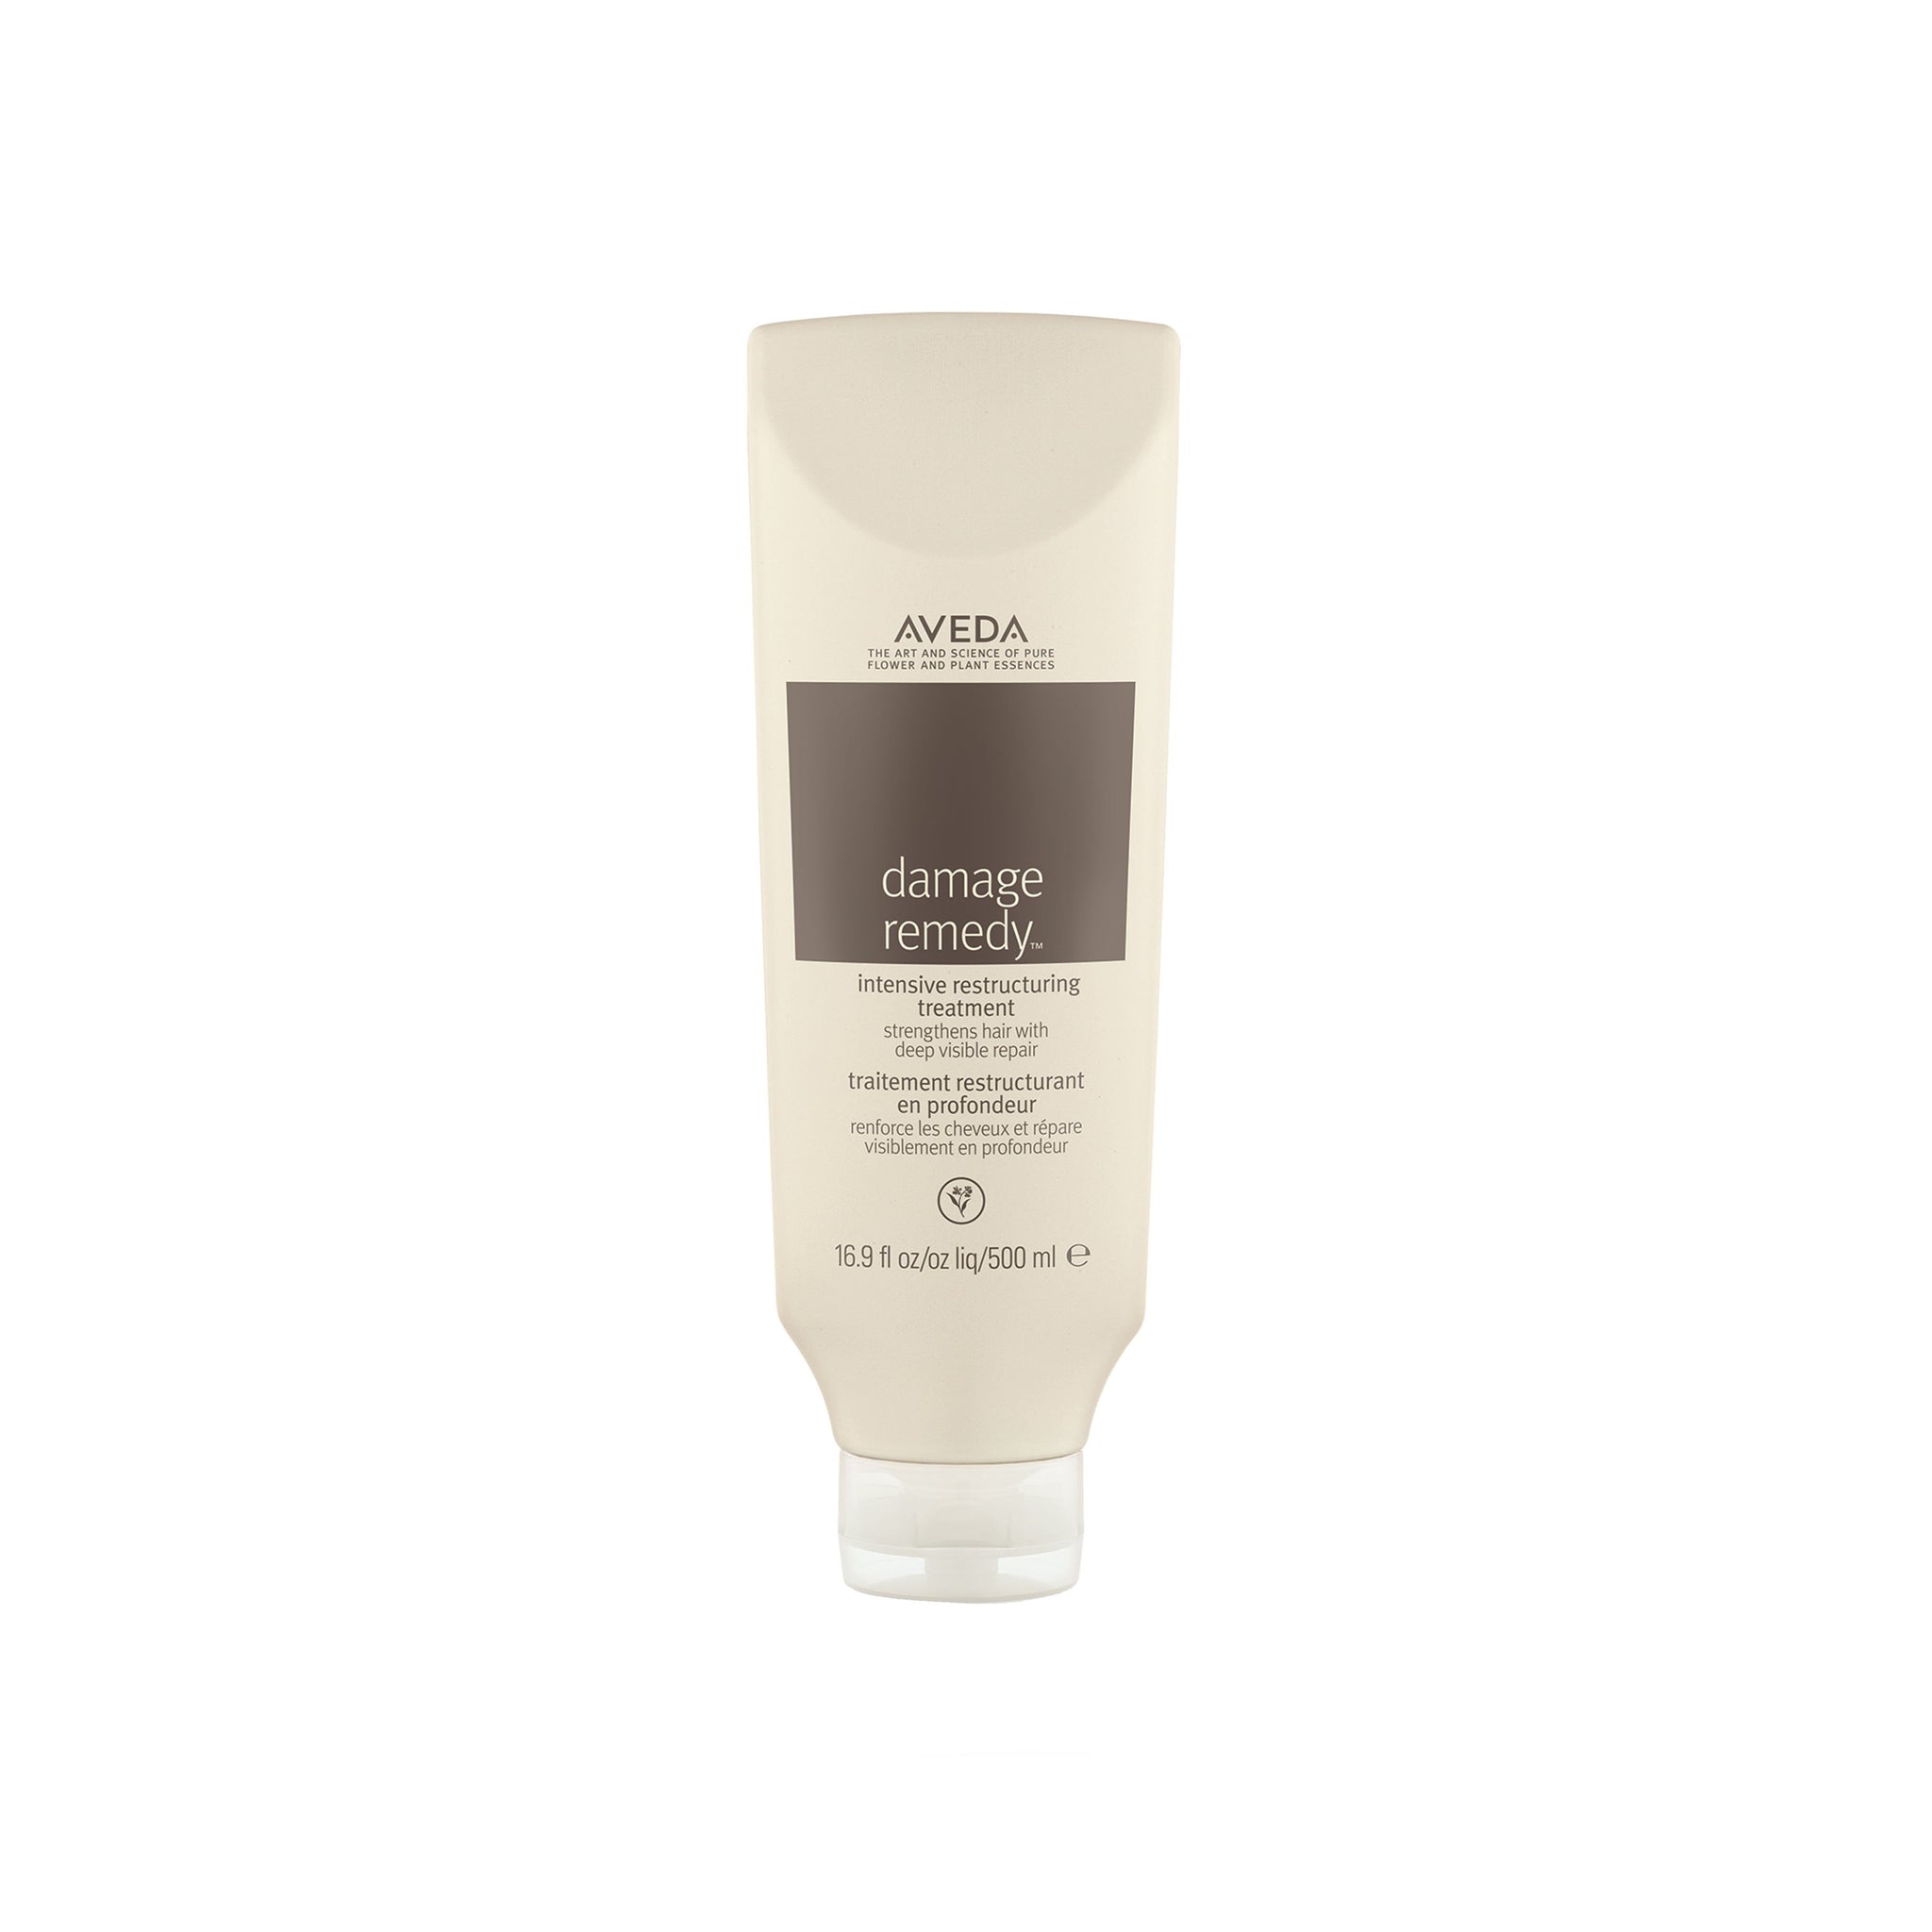 Aveda Damage Remedy Intensive Restructuring Treatment